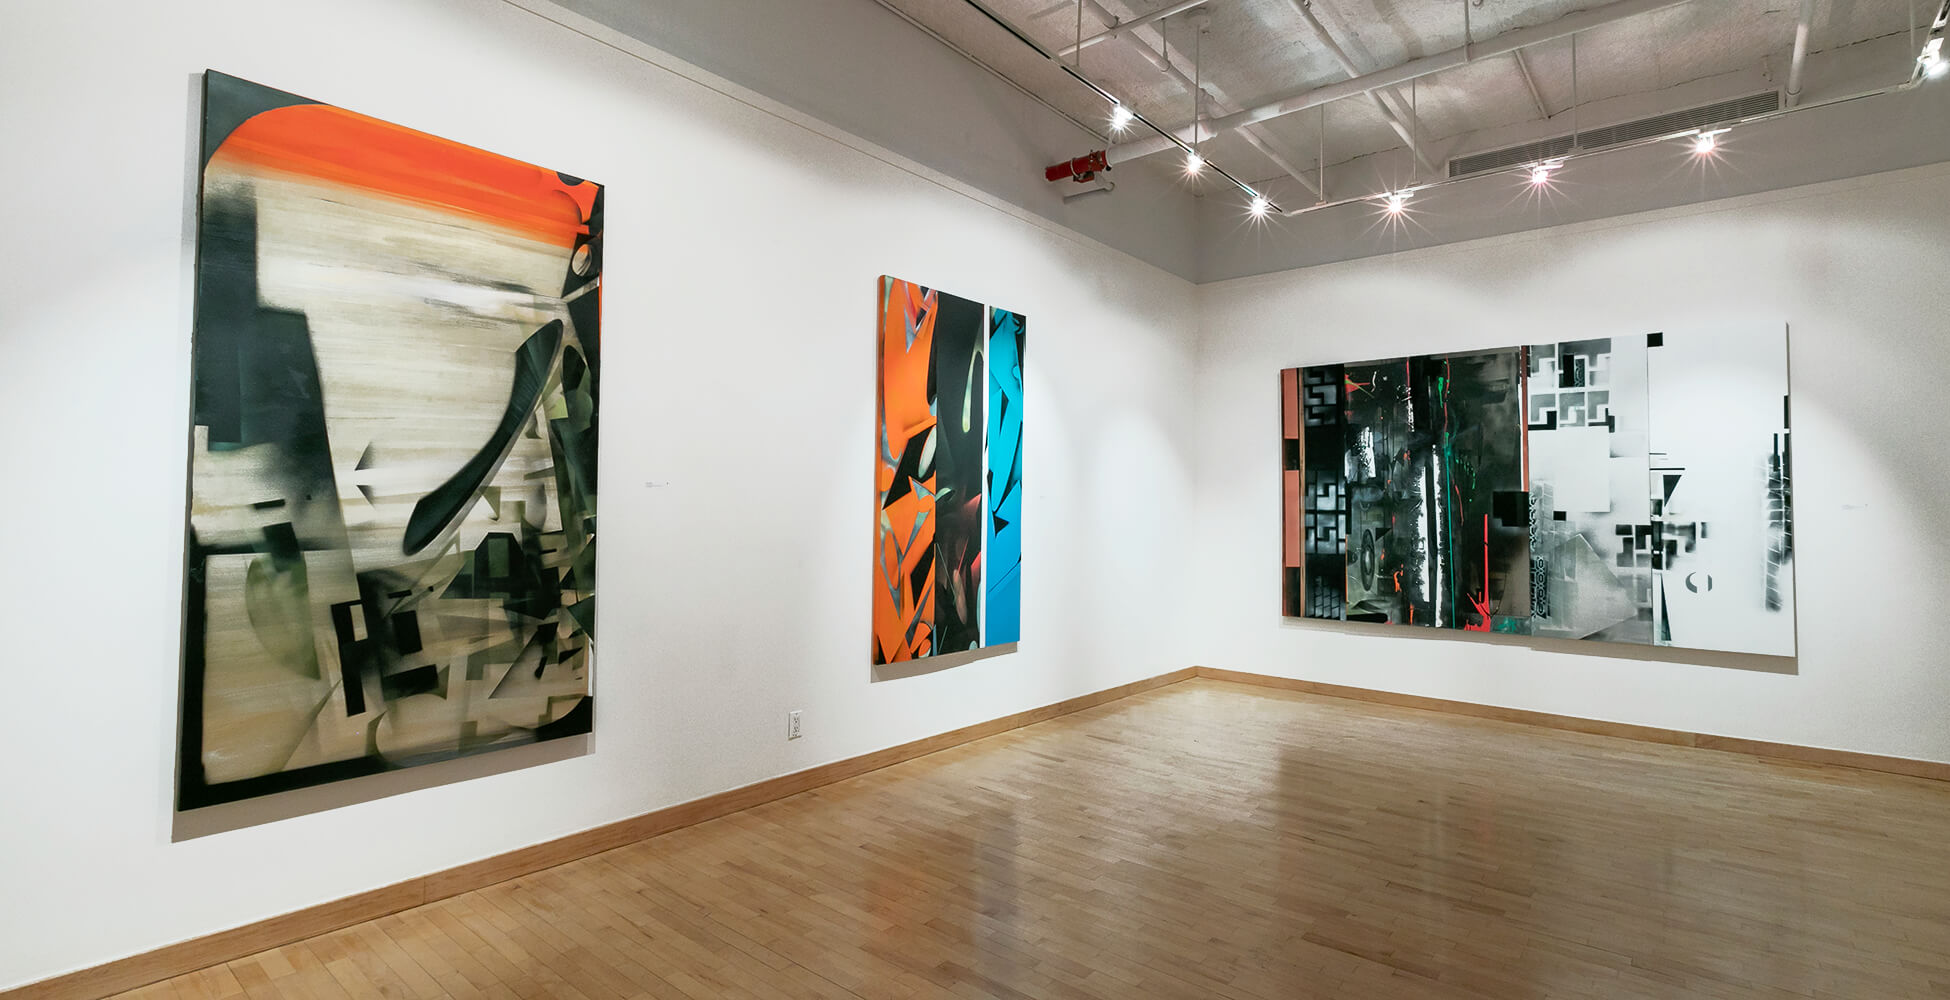 Installation View #4 of Nola Zirin's exhibition entitled 'Assembling Chaos' at June Kelly Gallery, Spring 2022.